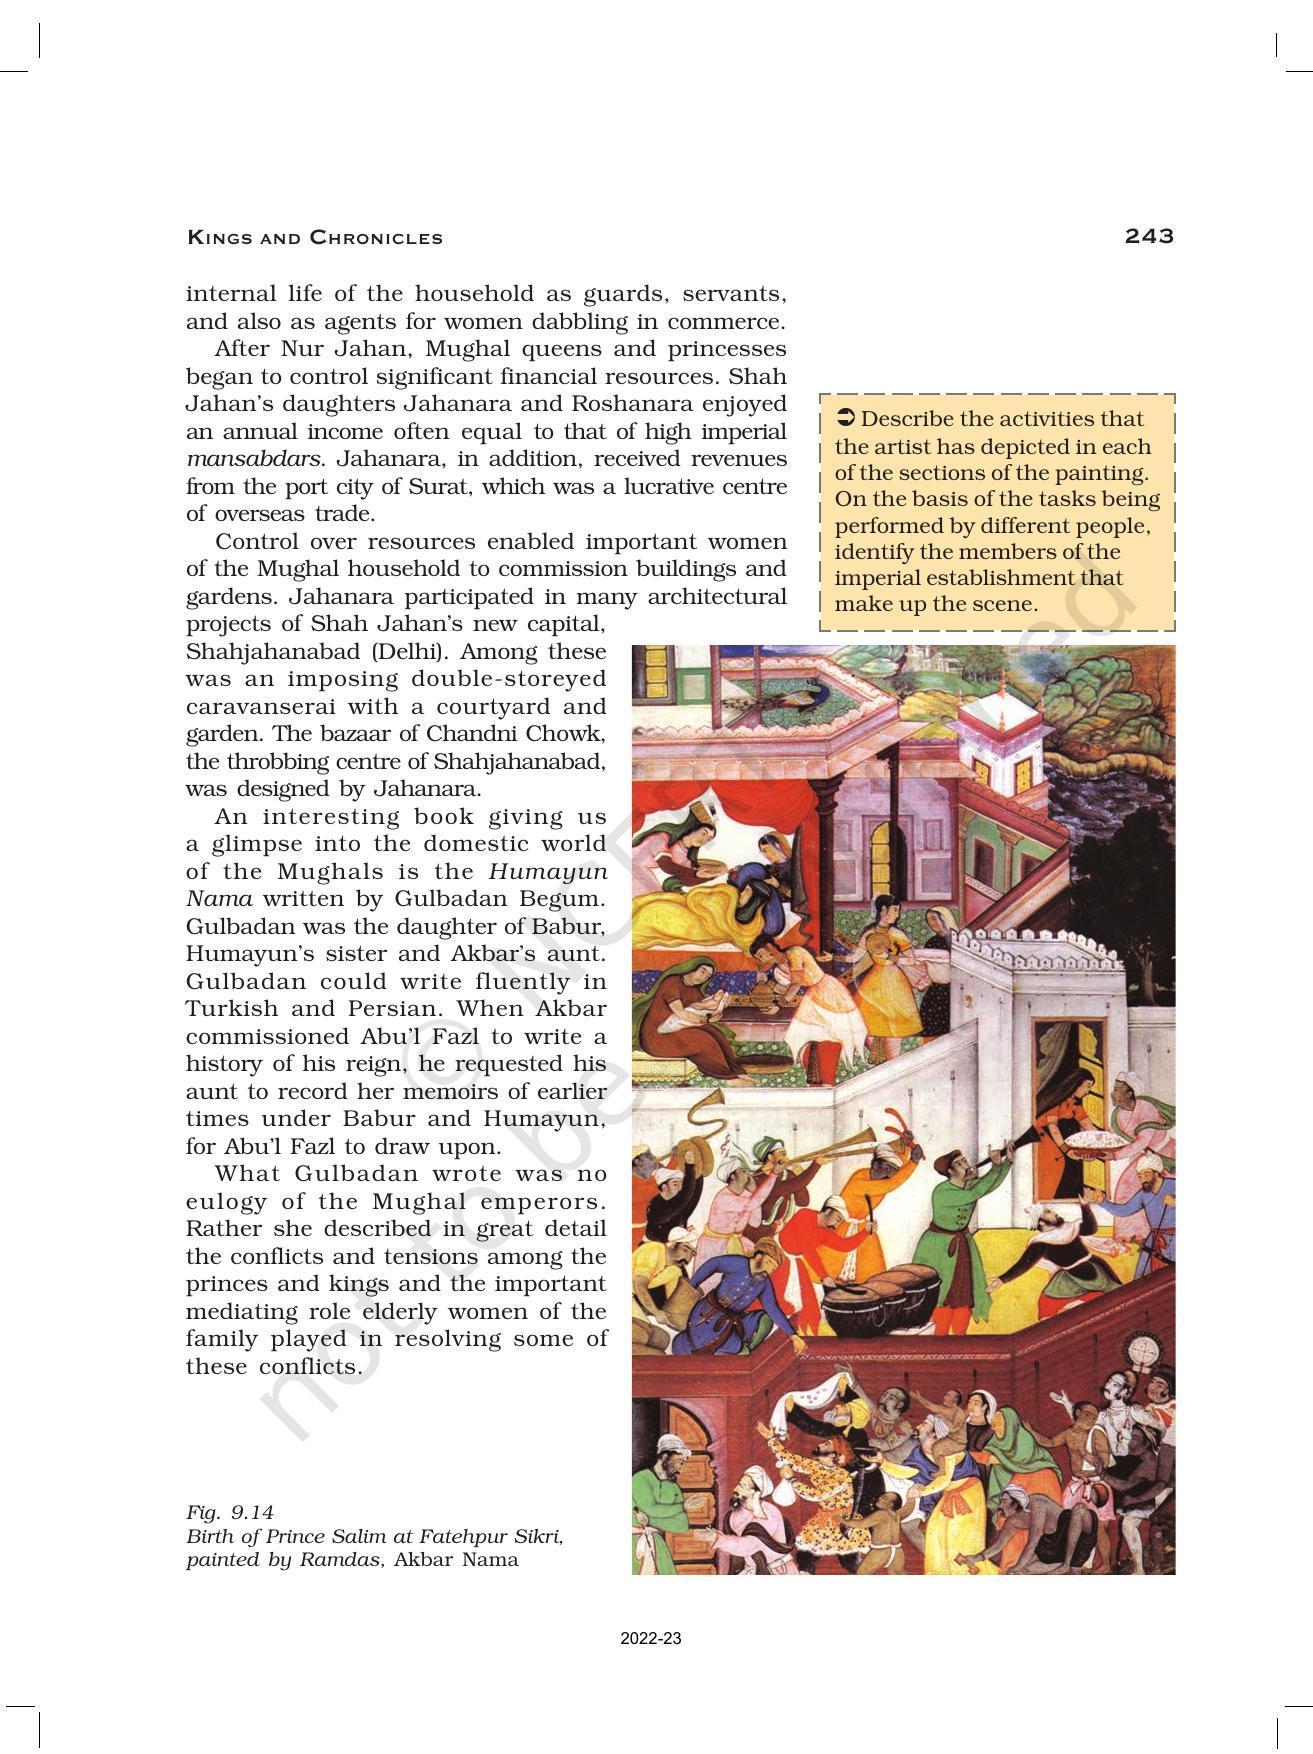 NCERT Book for Class 12 History (Part-II) Chapter 9 Kings and Chronicles - Page 20